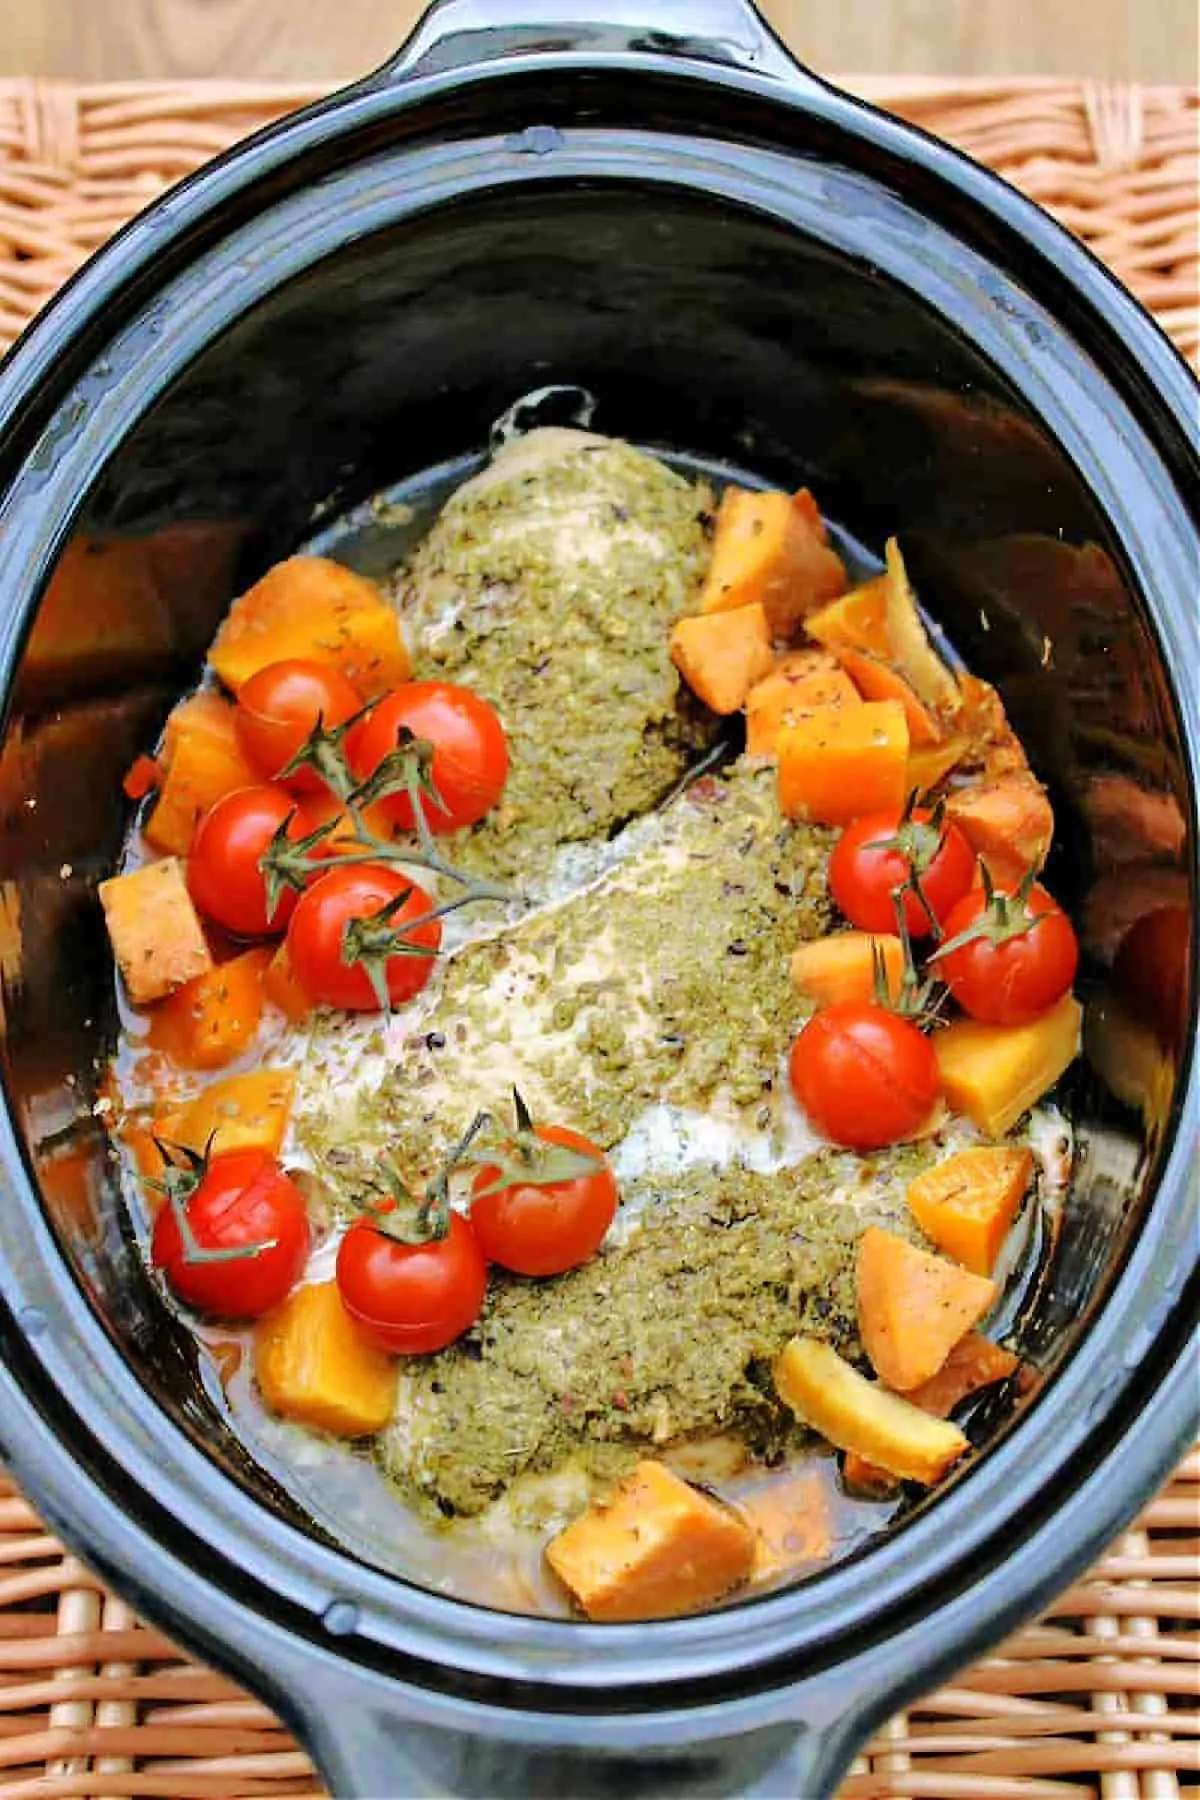 Slow cooker full of chicken with pesto on top, tomatoes and sweet potato chunks.